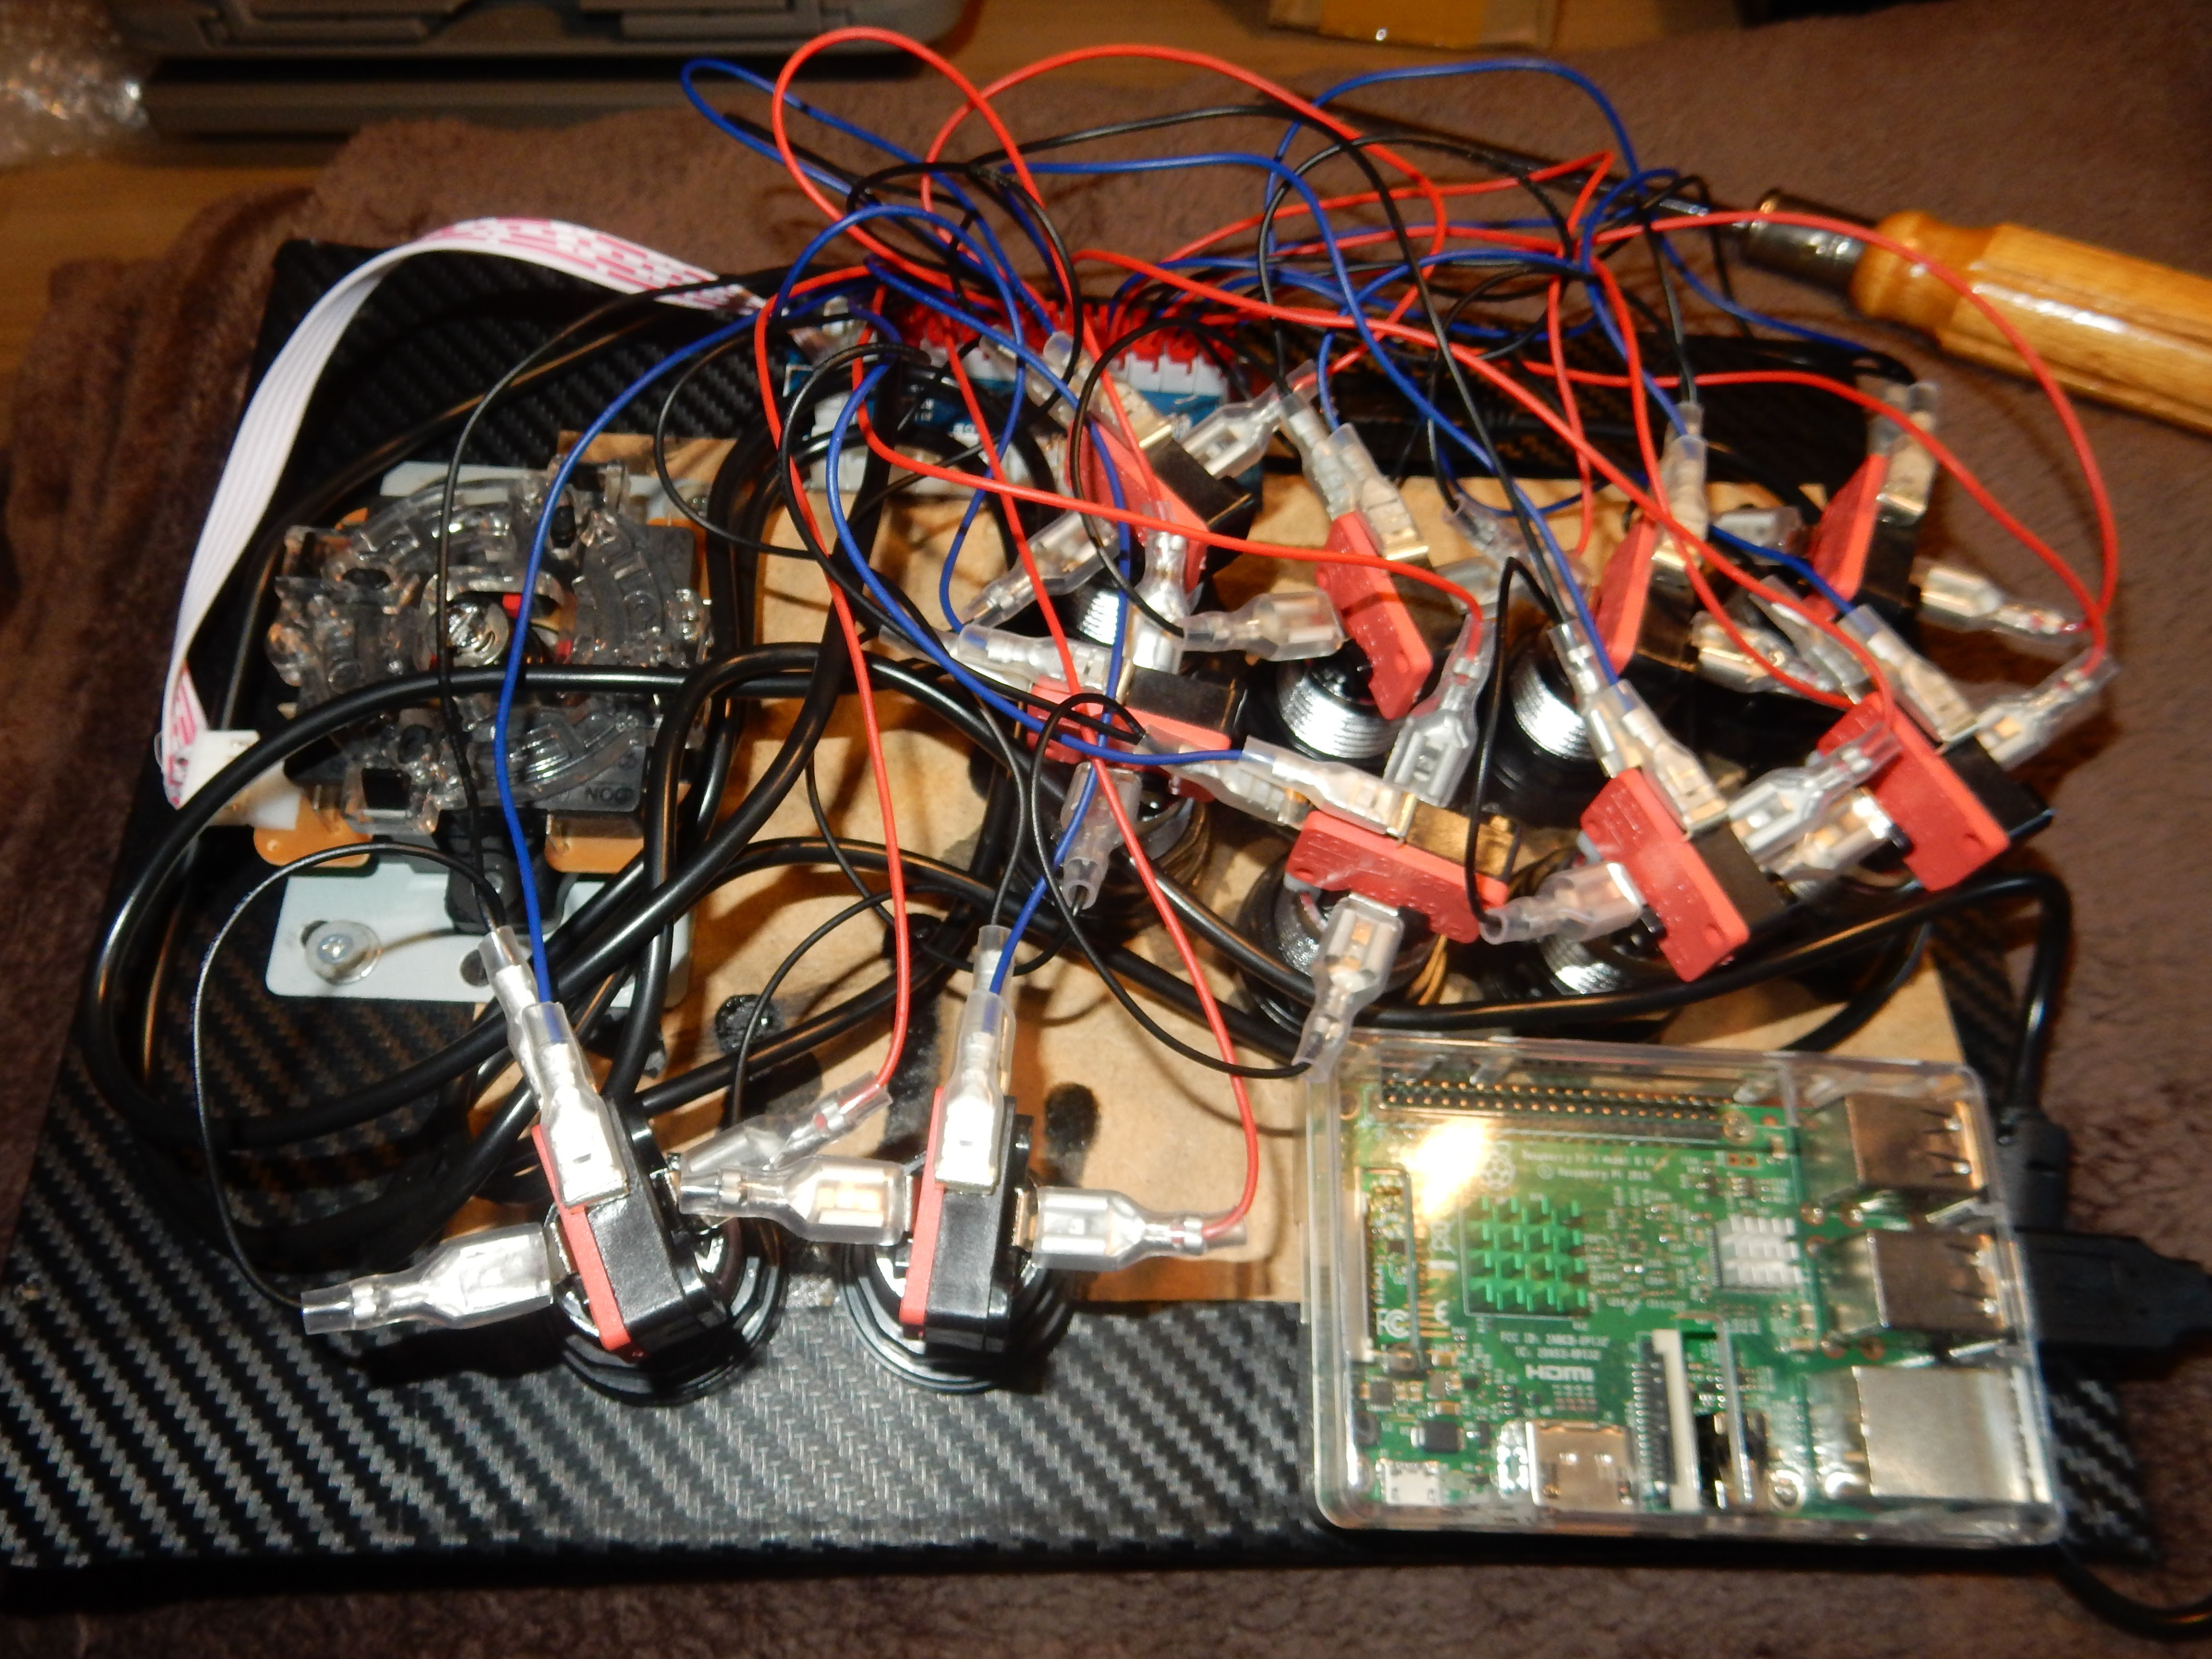 Inside the board, with cables